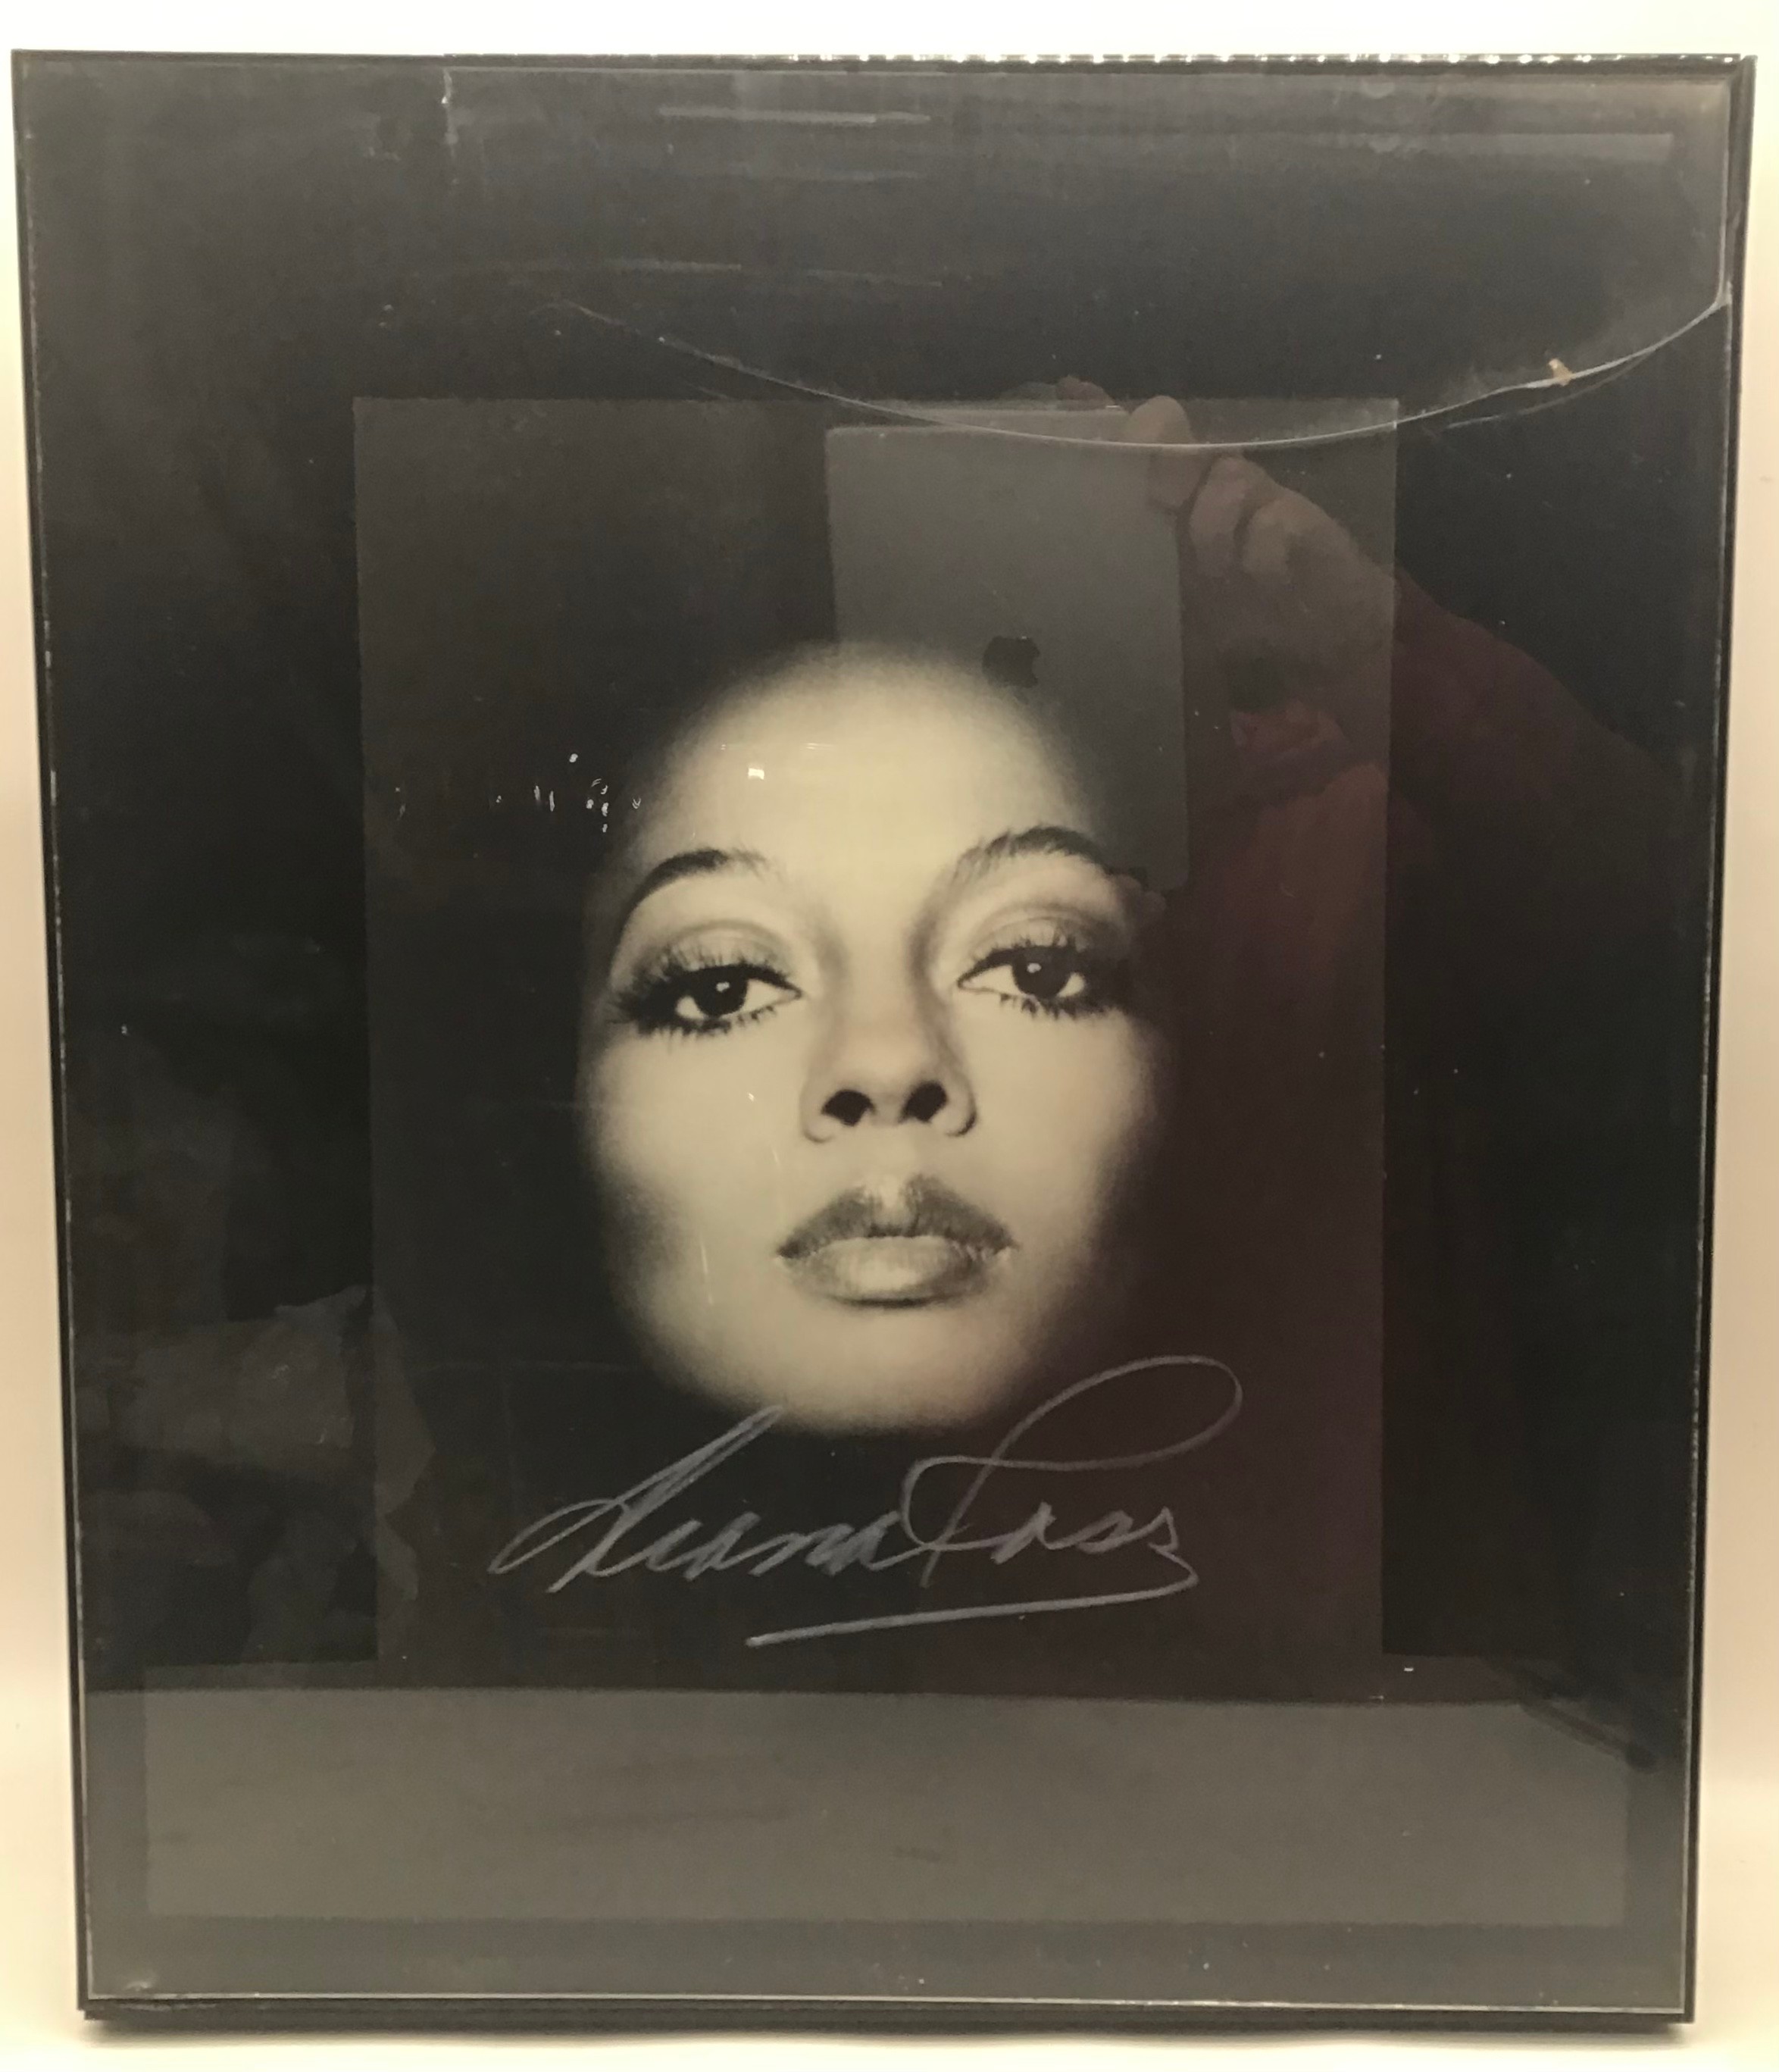 DIANA ROSS B&W SIGNED PHOTO. From a serious collector of Diana Ross memorabilia we have this 44 x